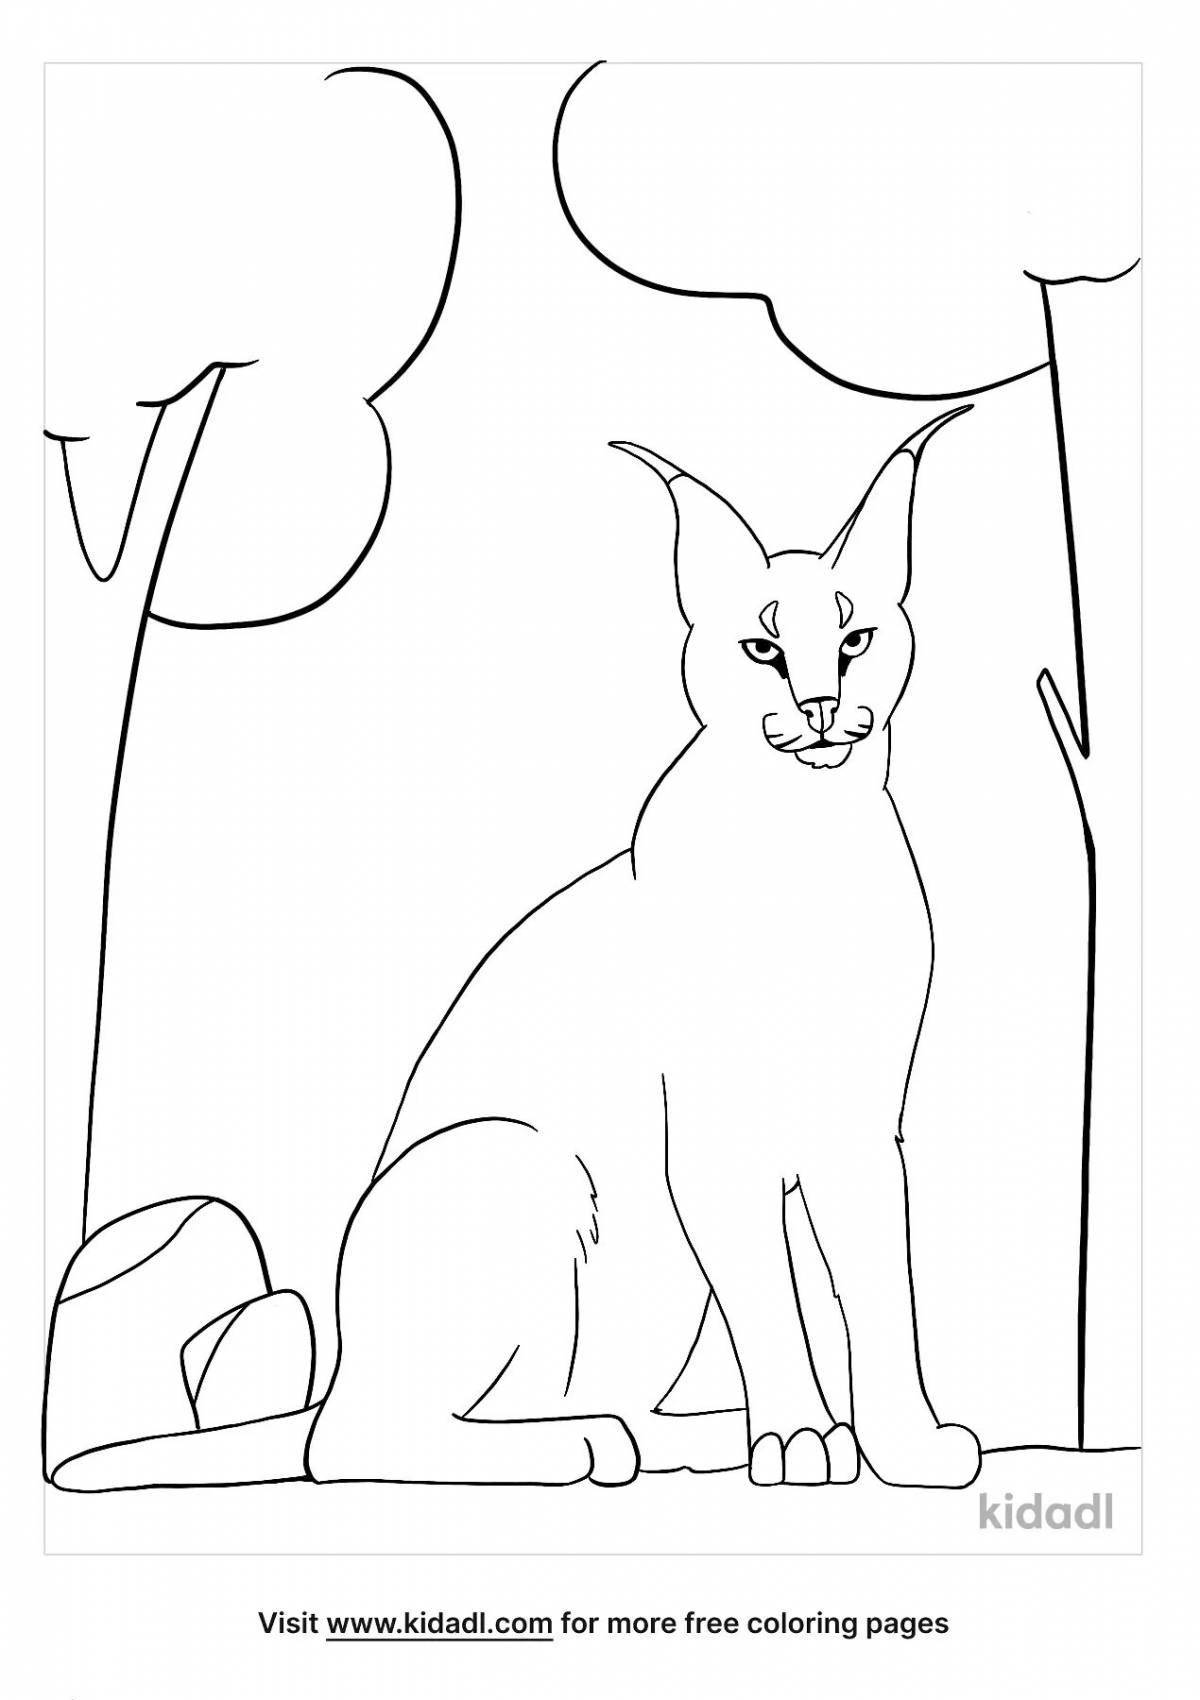 Caracal funny coloring book